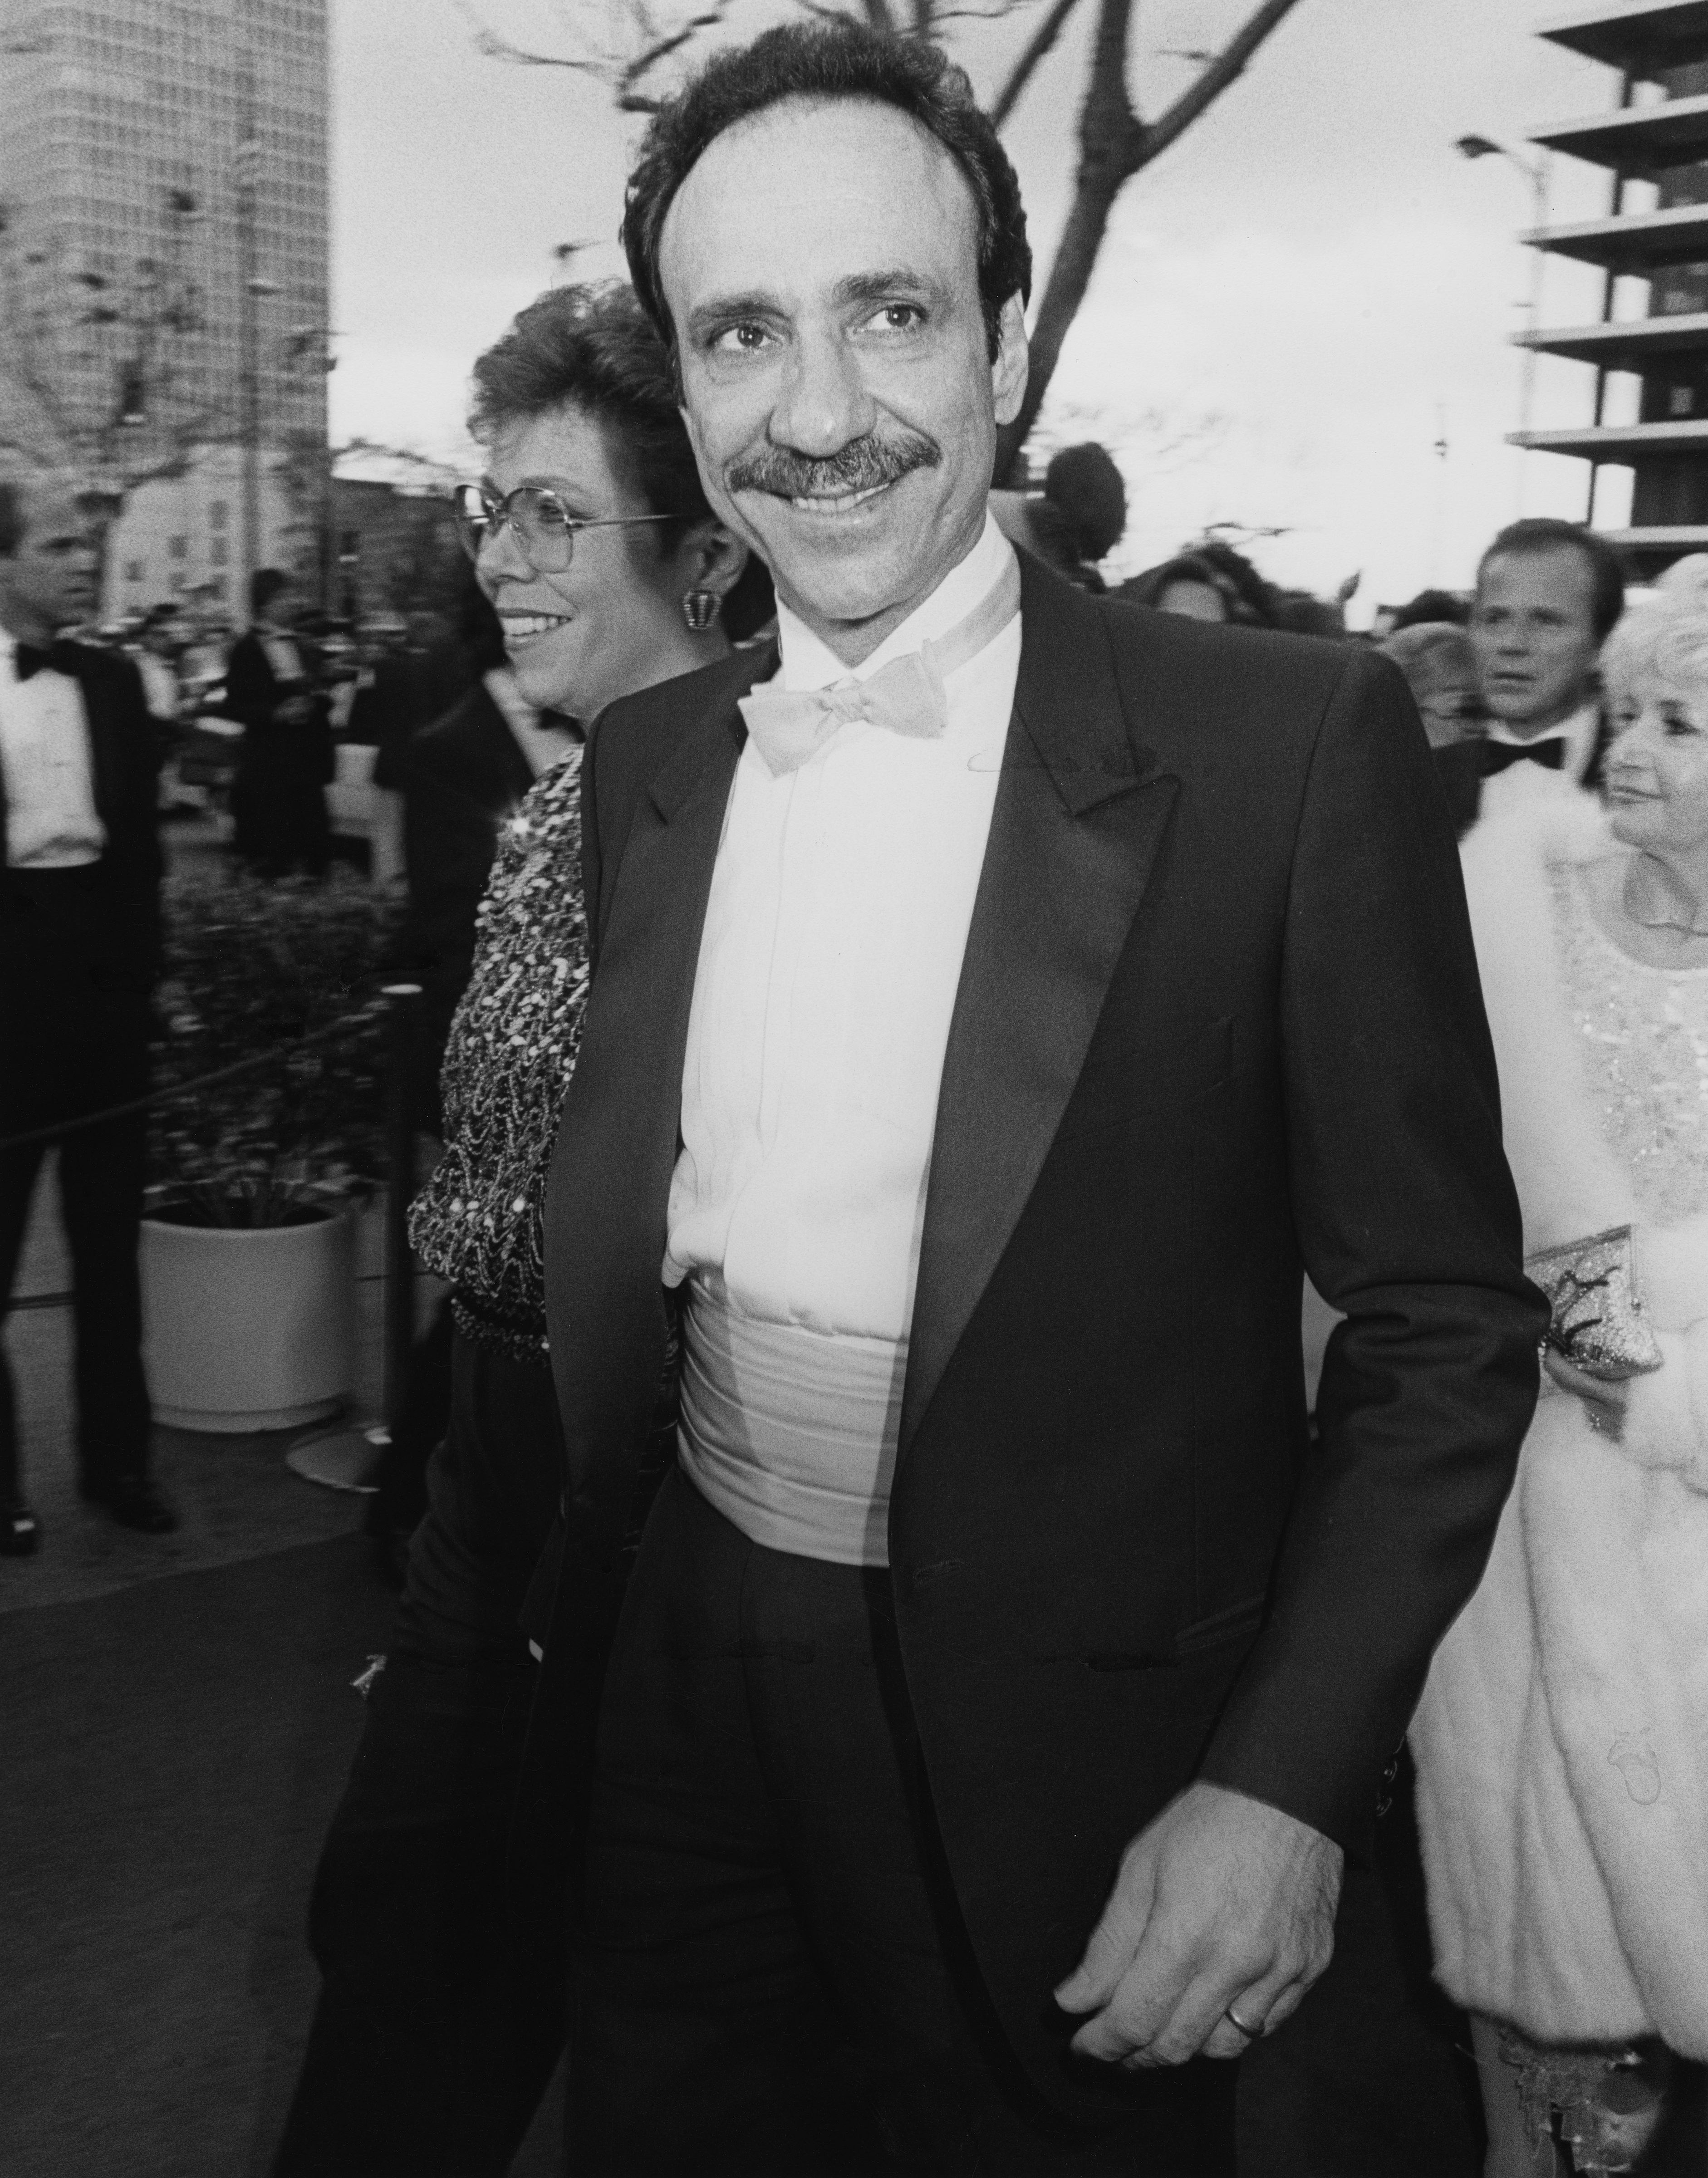 F. Murray Abraham and Kate Hannan attend the Academy Awards on March 25, 1985, in Los Angeles, California. | Source: Getty Images